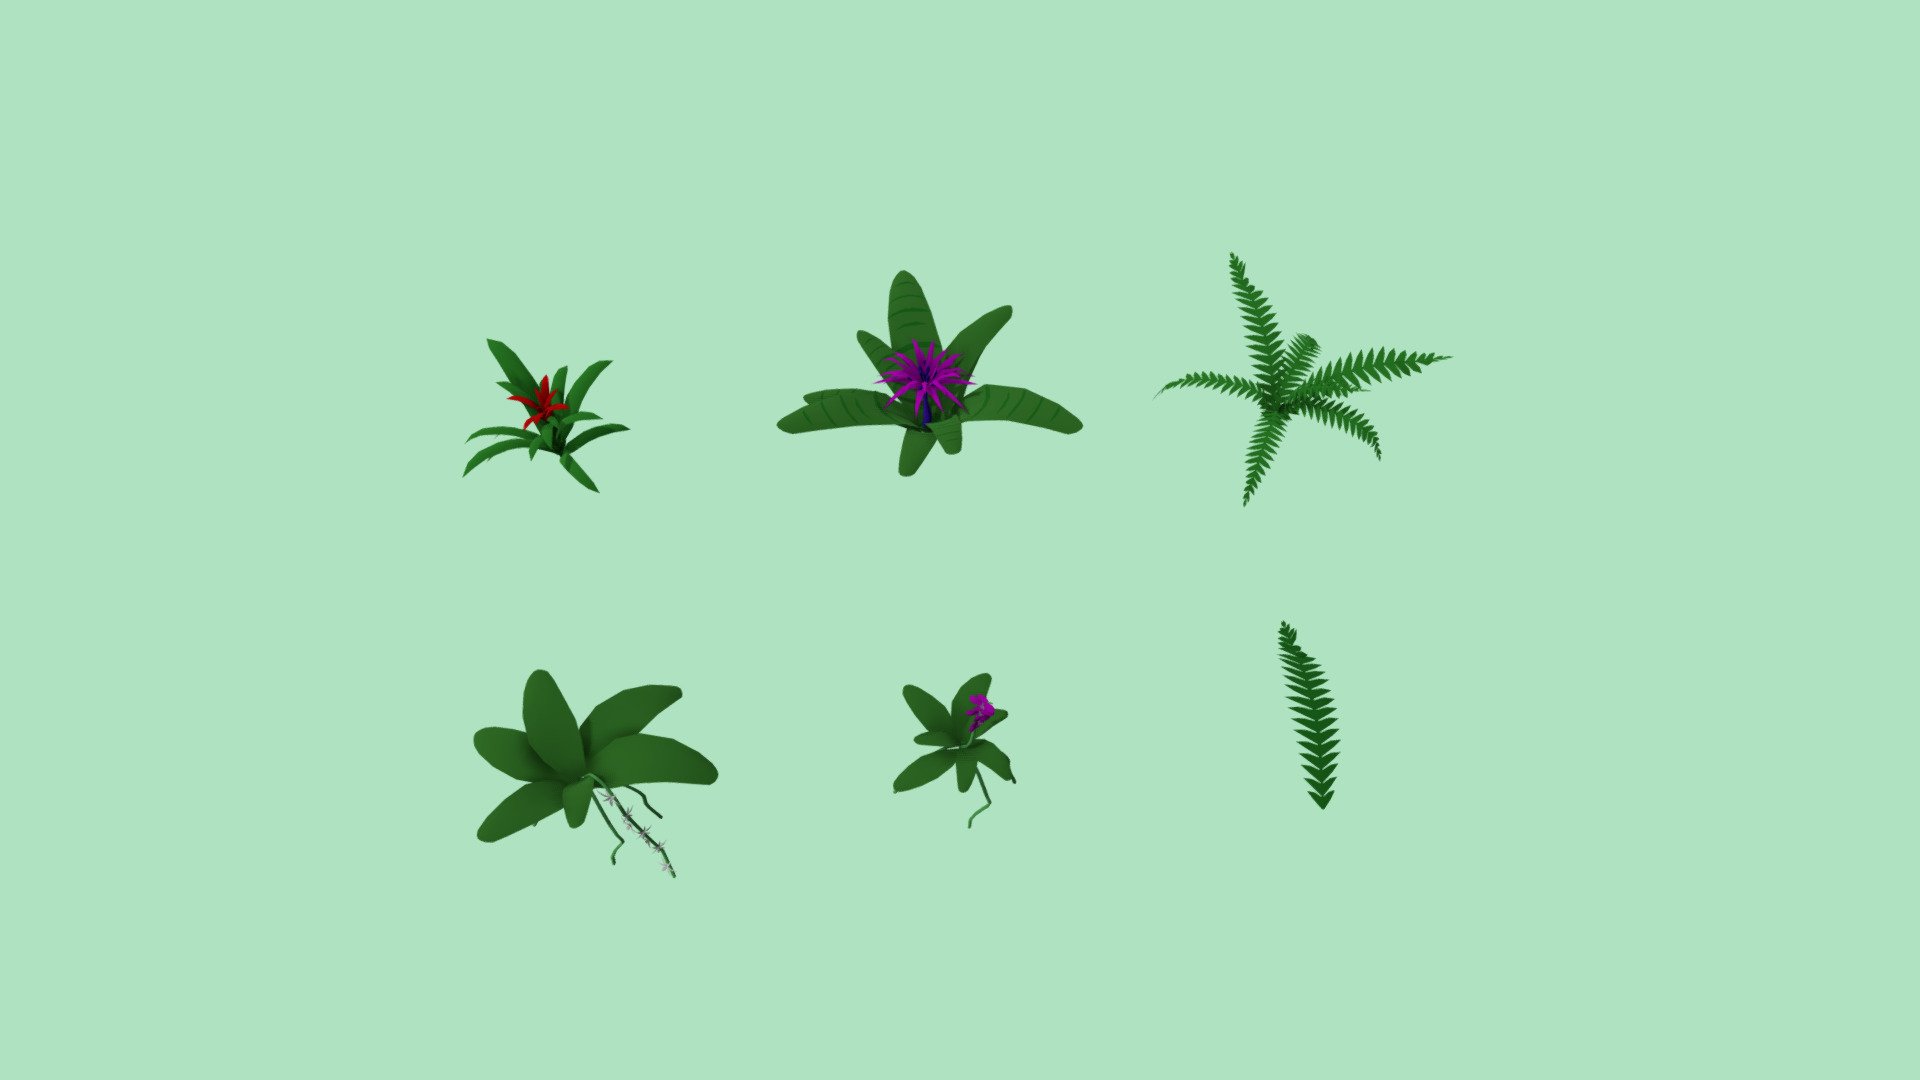 Populate a lowpoly or cartoon jungle scene with these lush rainforest plants! Both bromelias and orchids have separate flower meshes, and fern has a separate leaf to add variety. These models are part of my Poly Jungle package in the Unity Asset Store 3d model